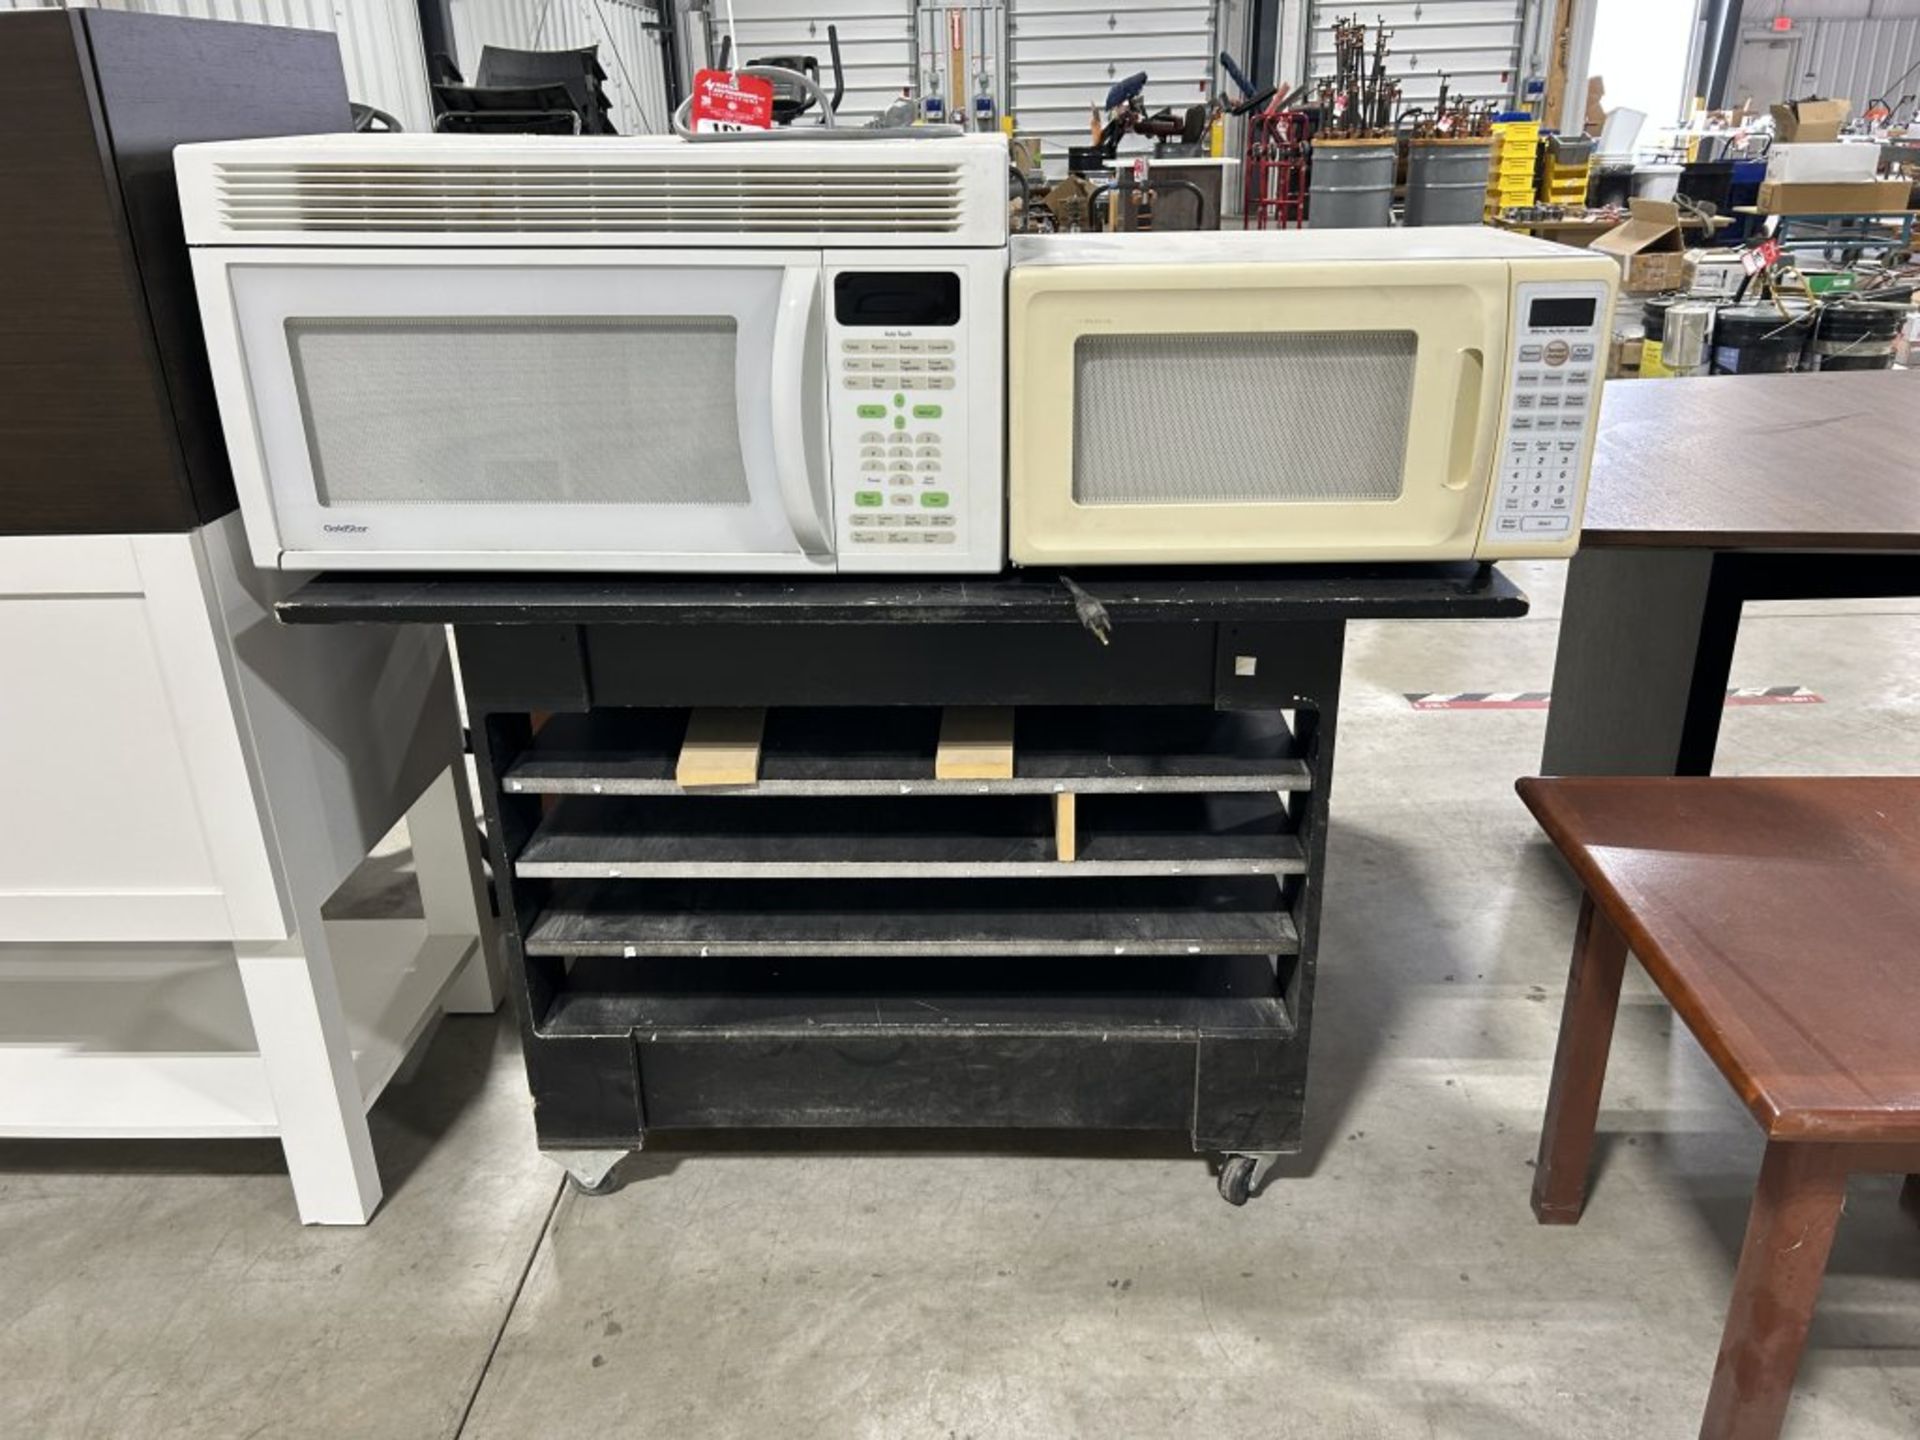 GOLDSTAR 30'' X 15'' MICROWAVE, PANASONIC 22'' X 16'' MICROWAVE, AND ROLL-AROUND MATERIAL CART